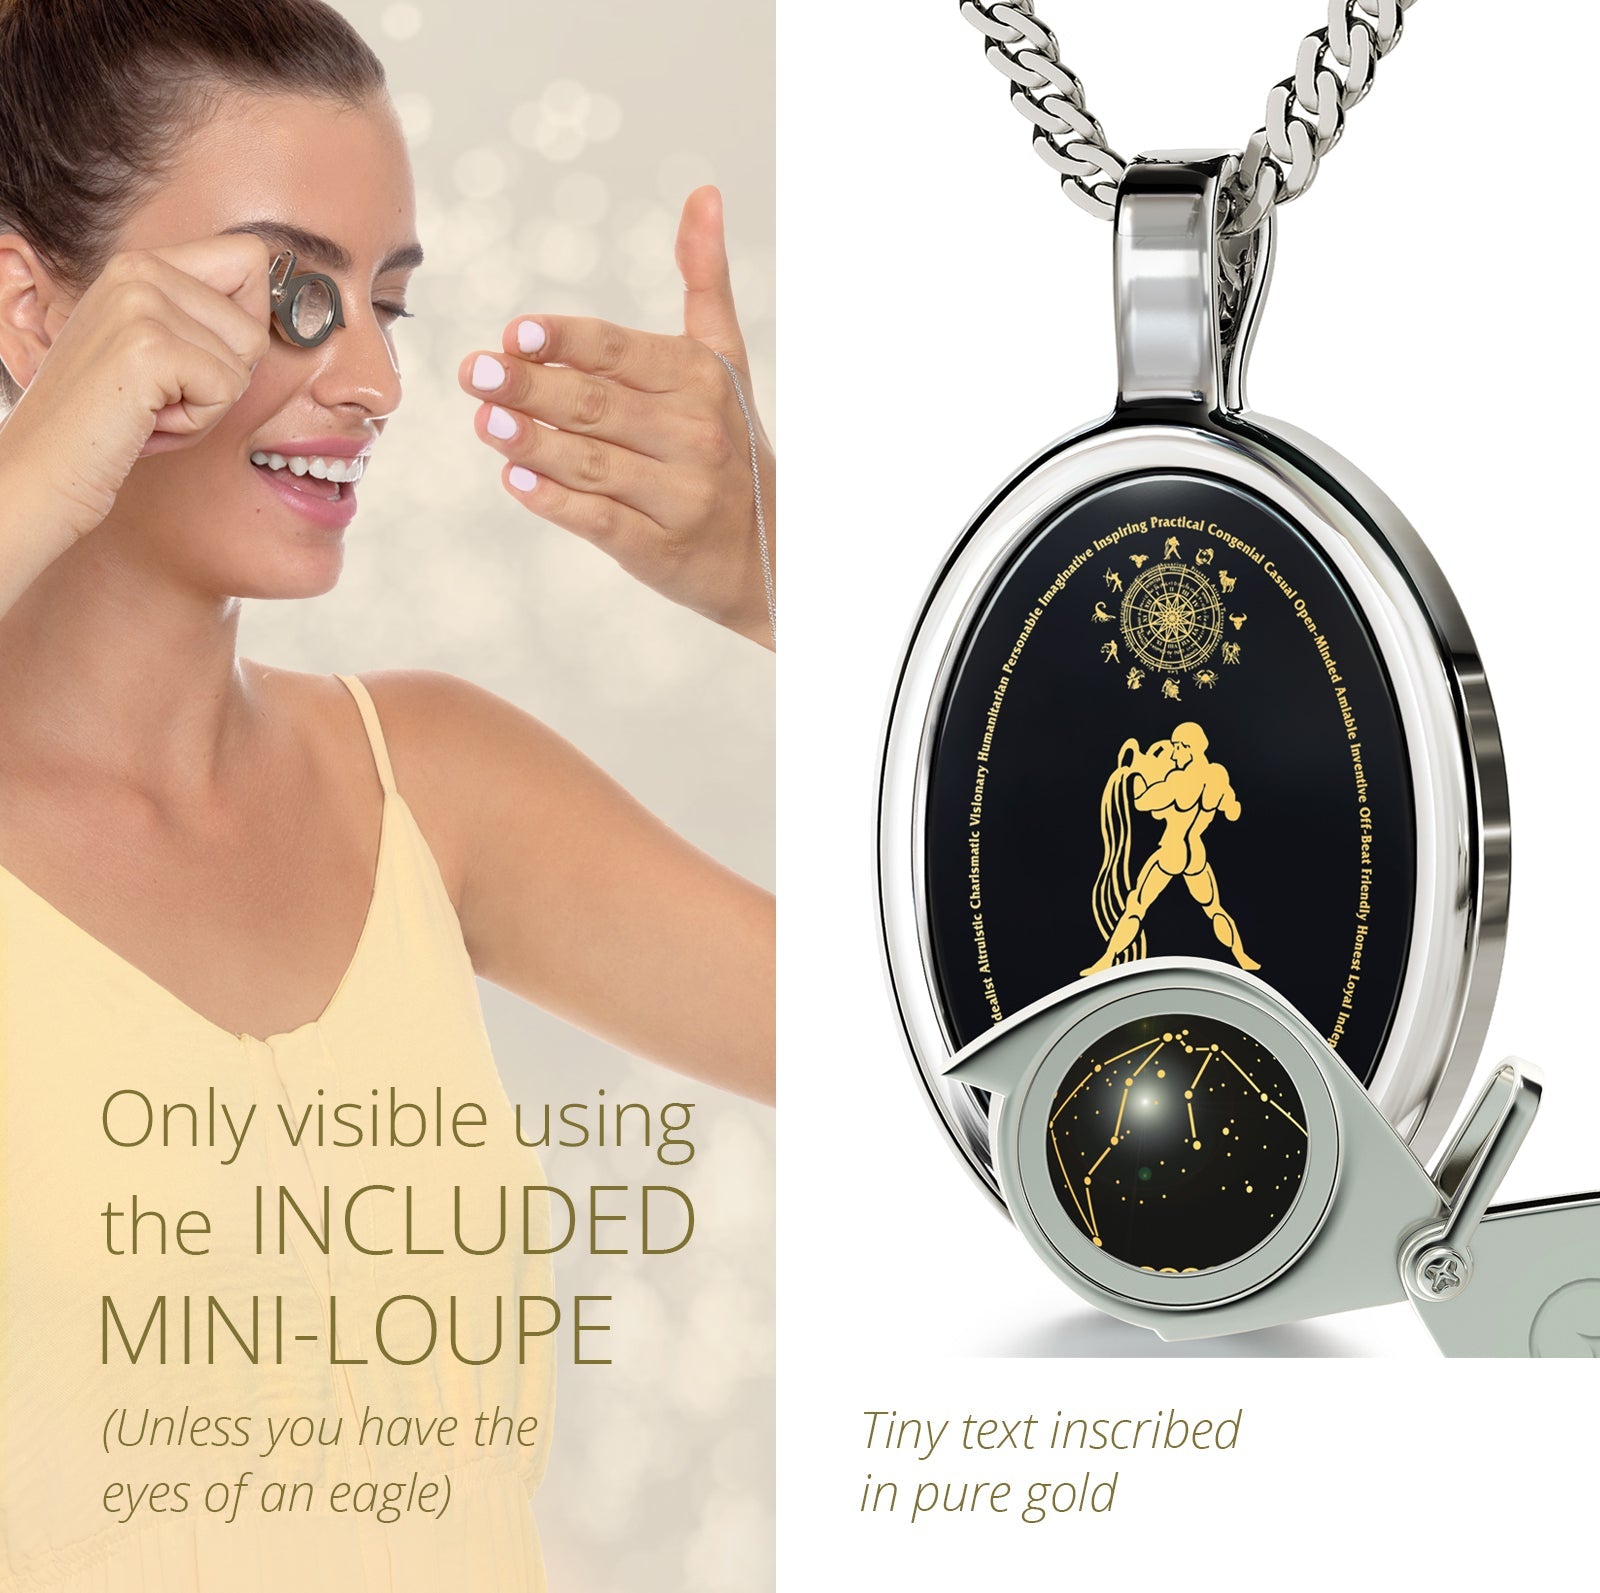 Circular design of an Aquarius Necklace Zodiac Pendant on a necklace featuring the water-bearer symbol and constellation with decorative elements and texts detailing personality traits, all beautifully crafted in 24k gold inscribed on Onyx Stone.